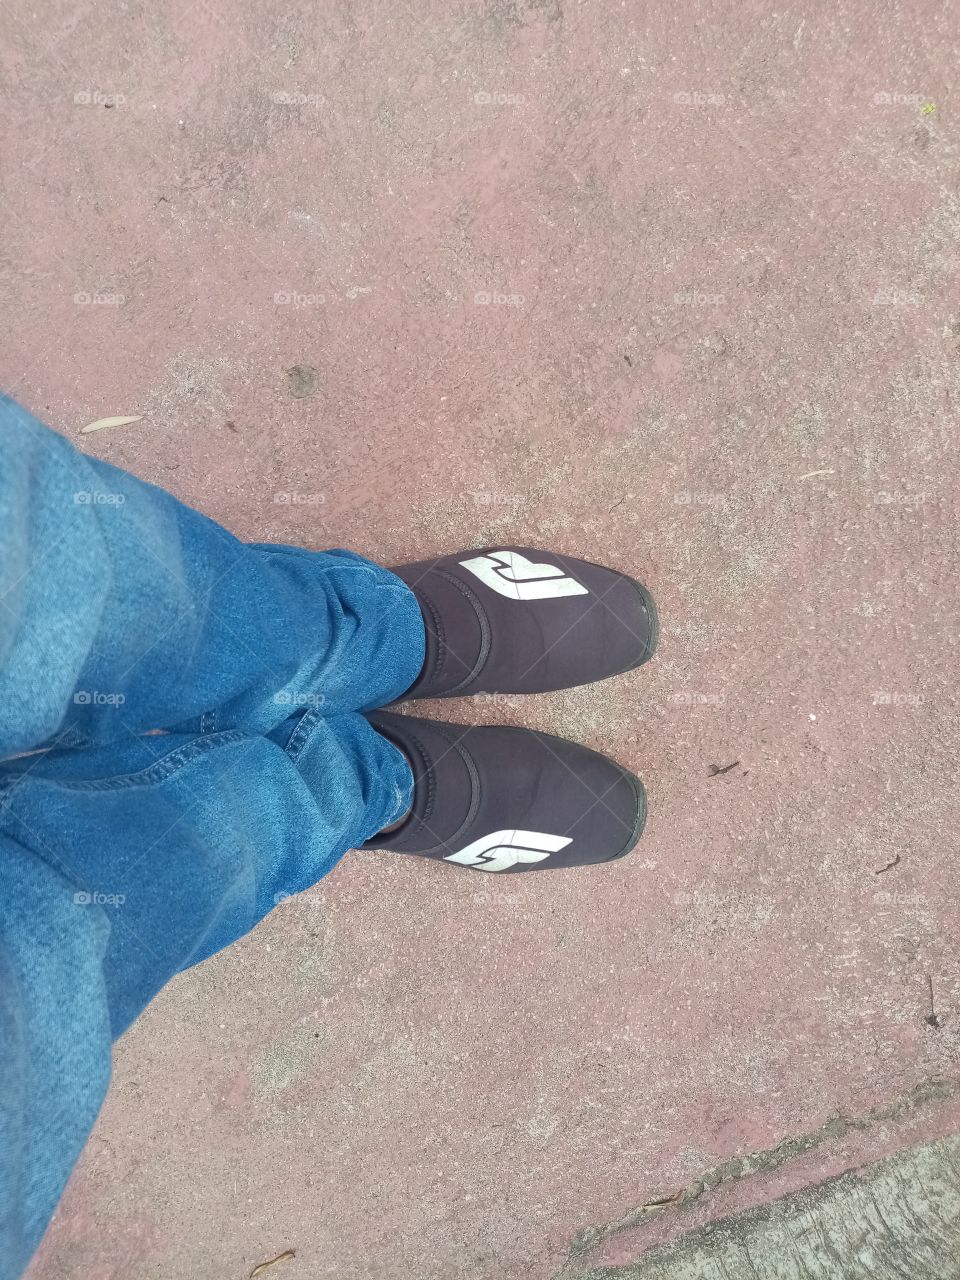 My shoes